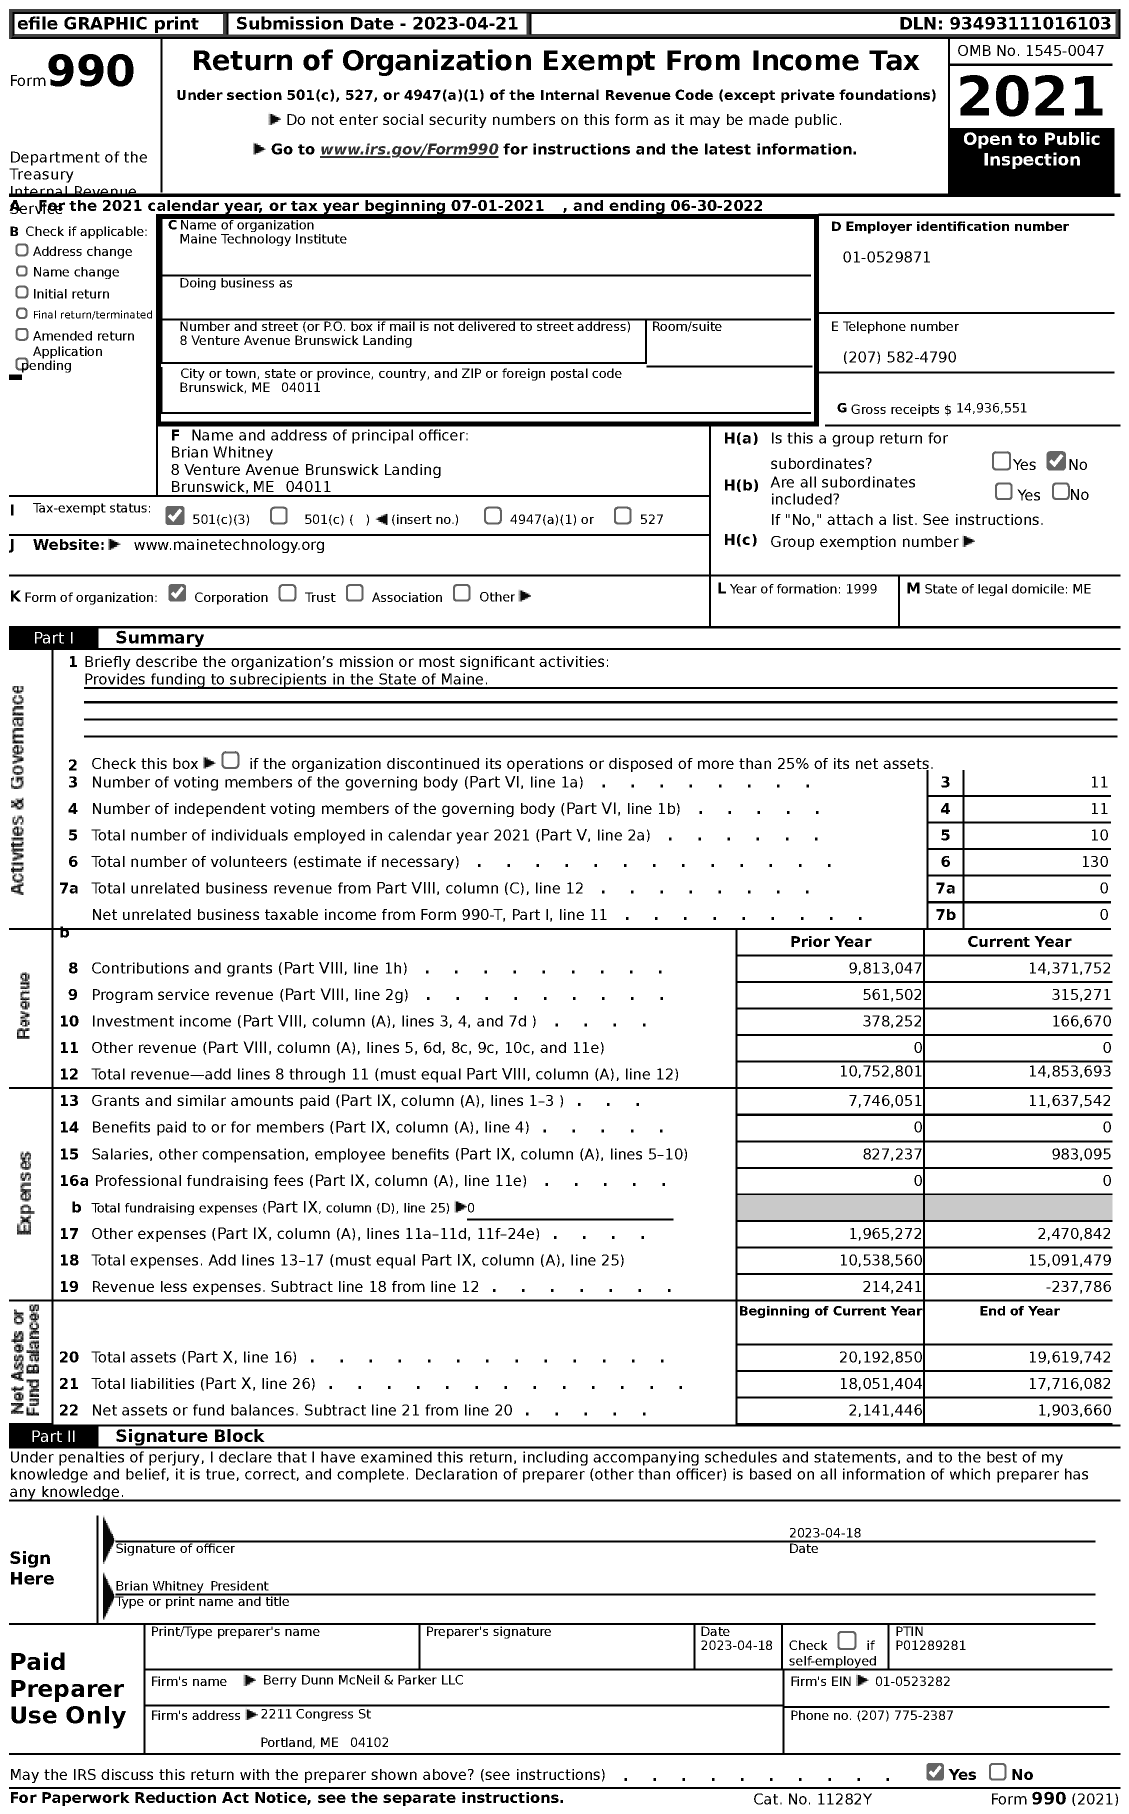 Image of first page of 2021 Form 990 for Maine Technology Institute (MTI)